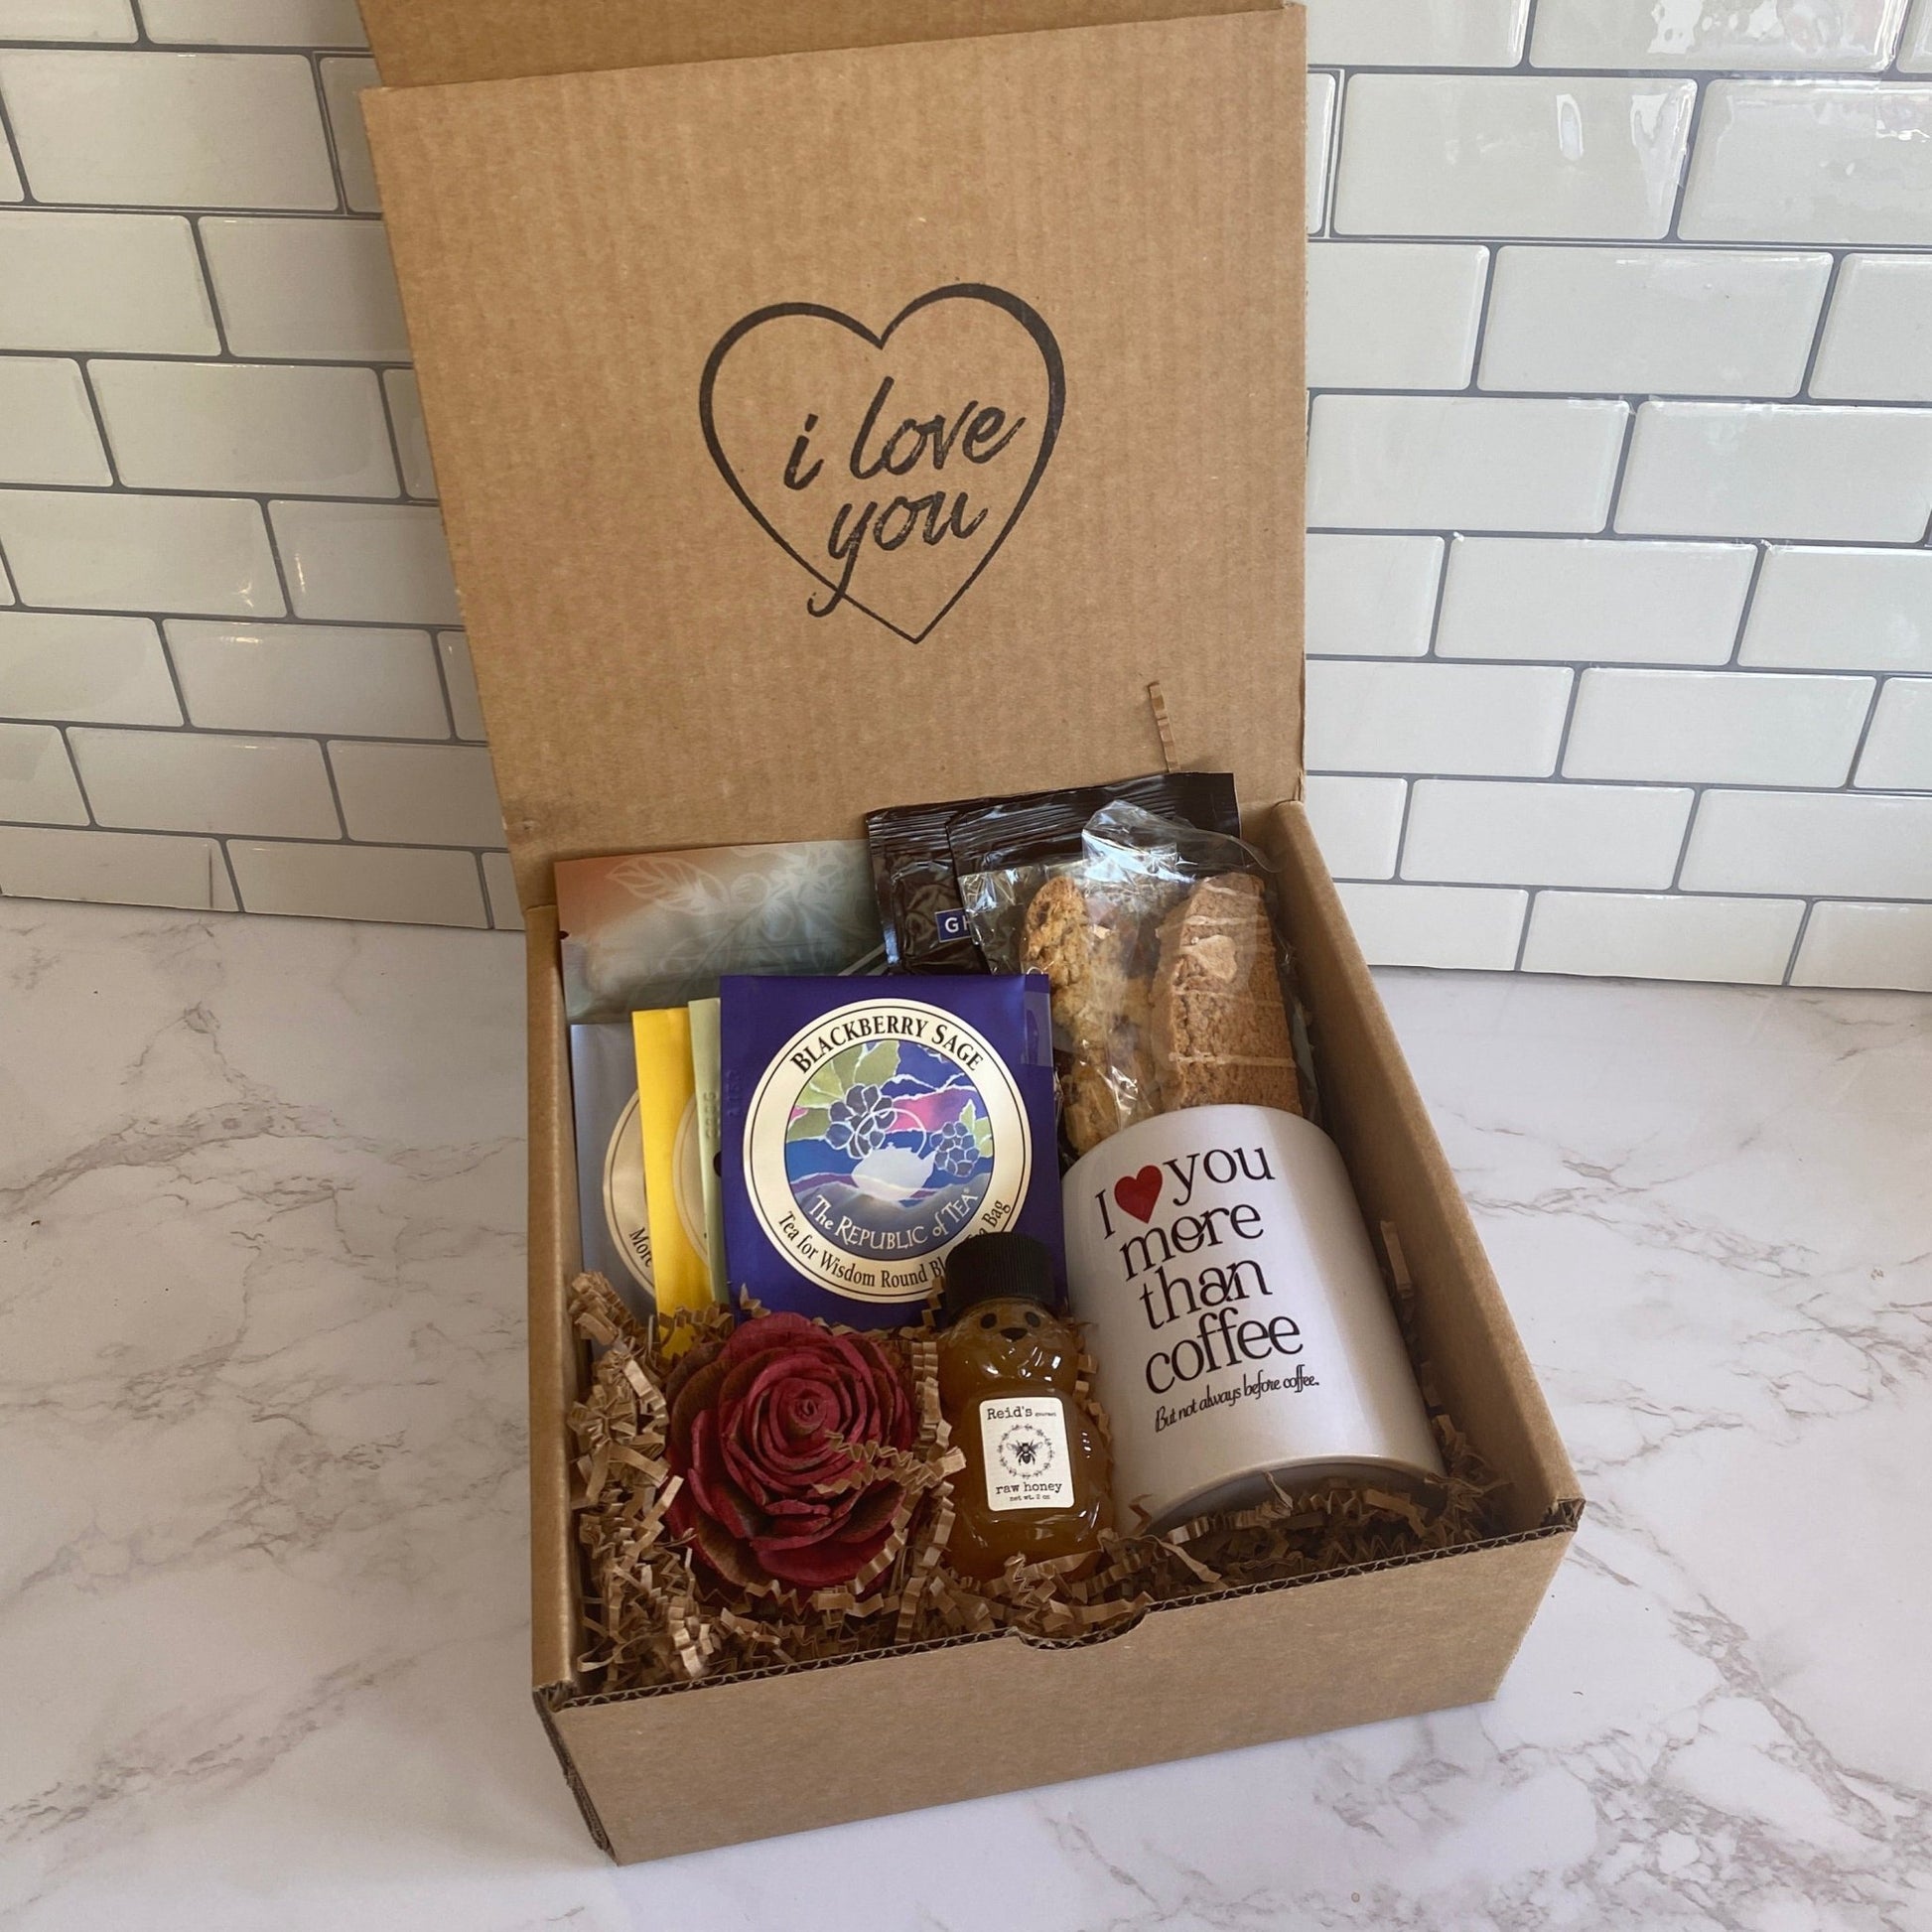 View / Order Gift Items - The Gift of Love